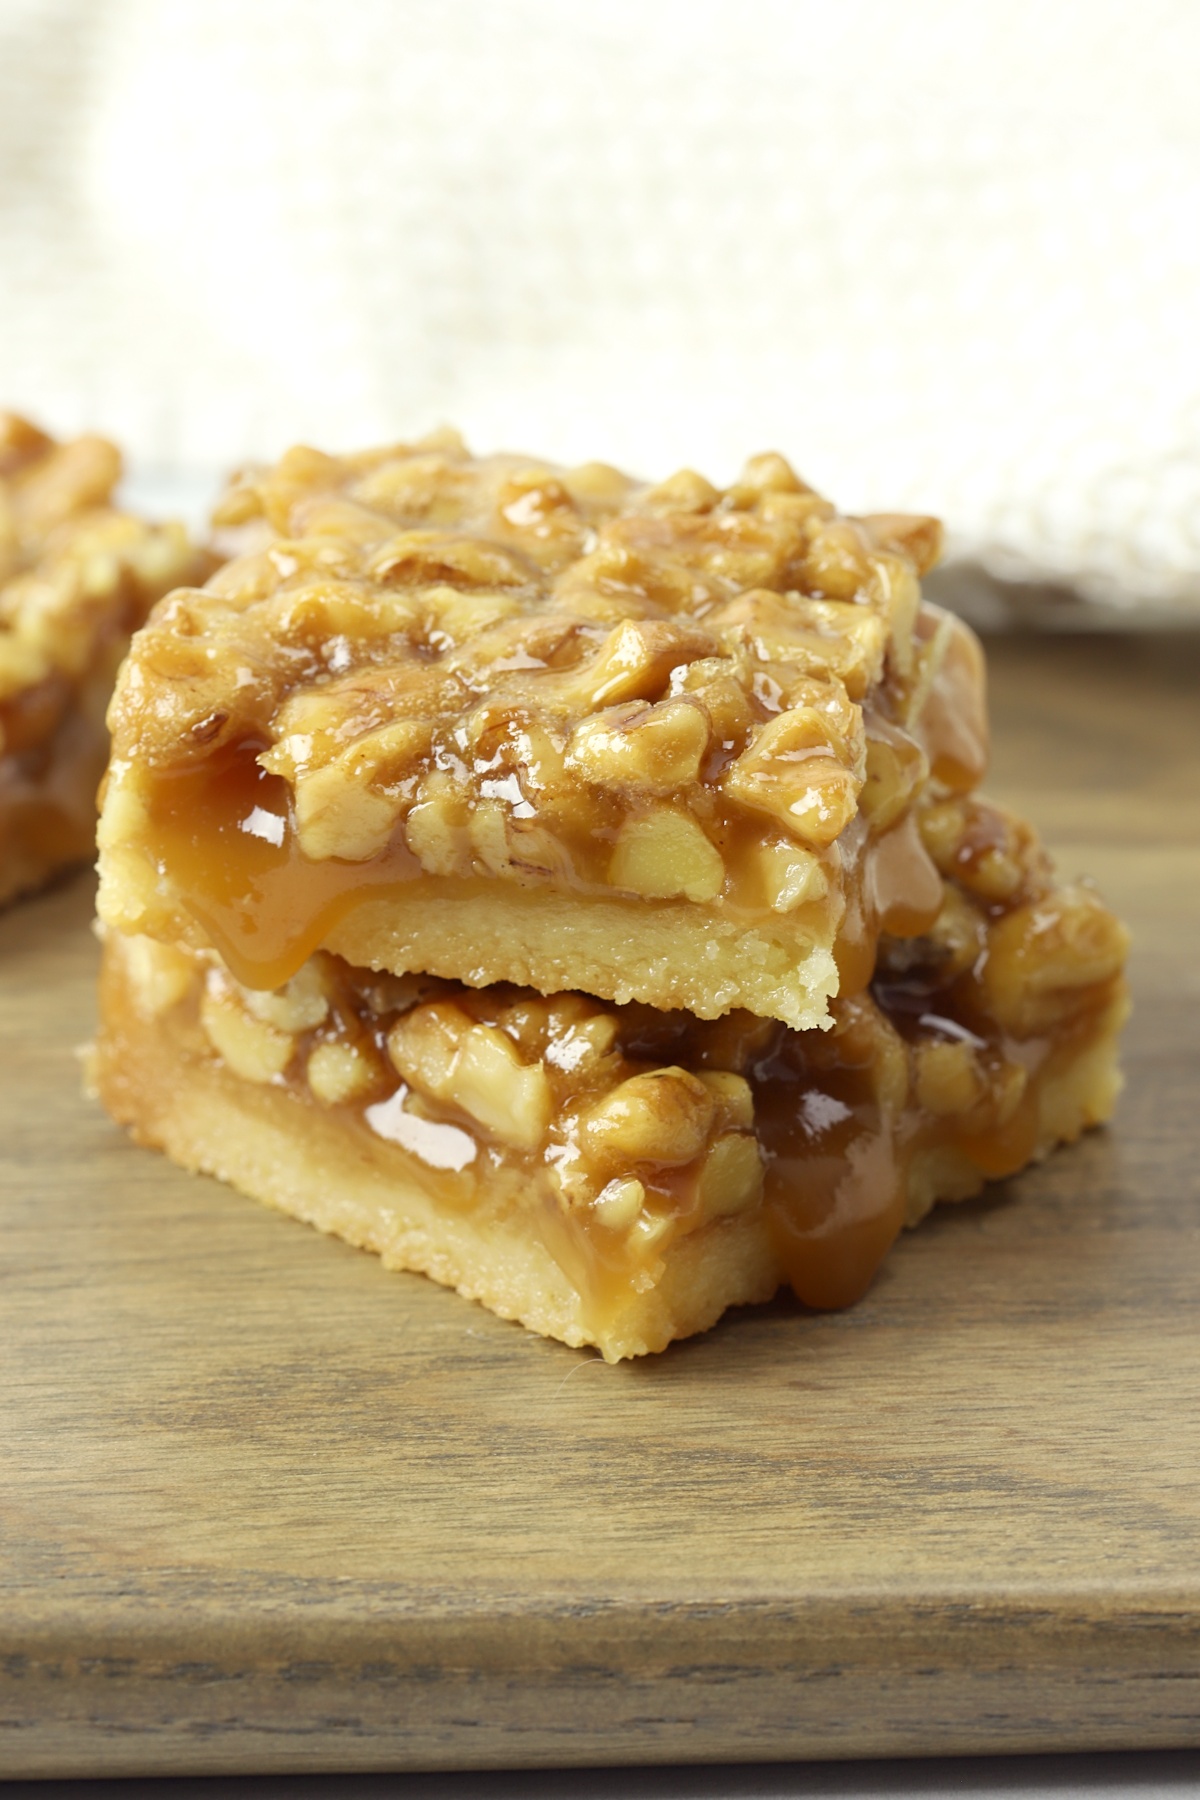 A stack of two shortbread bars topped with walnuts.